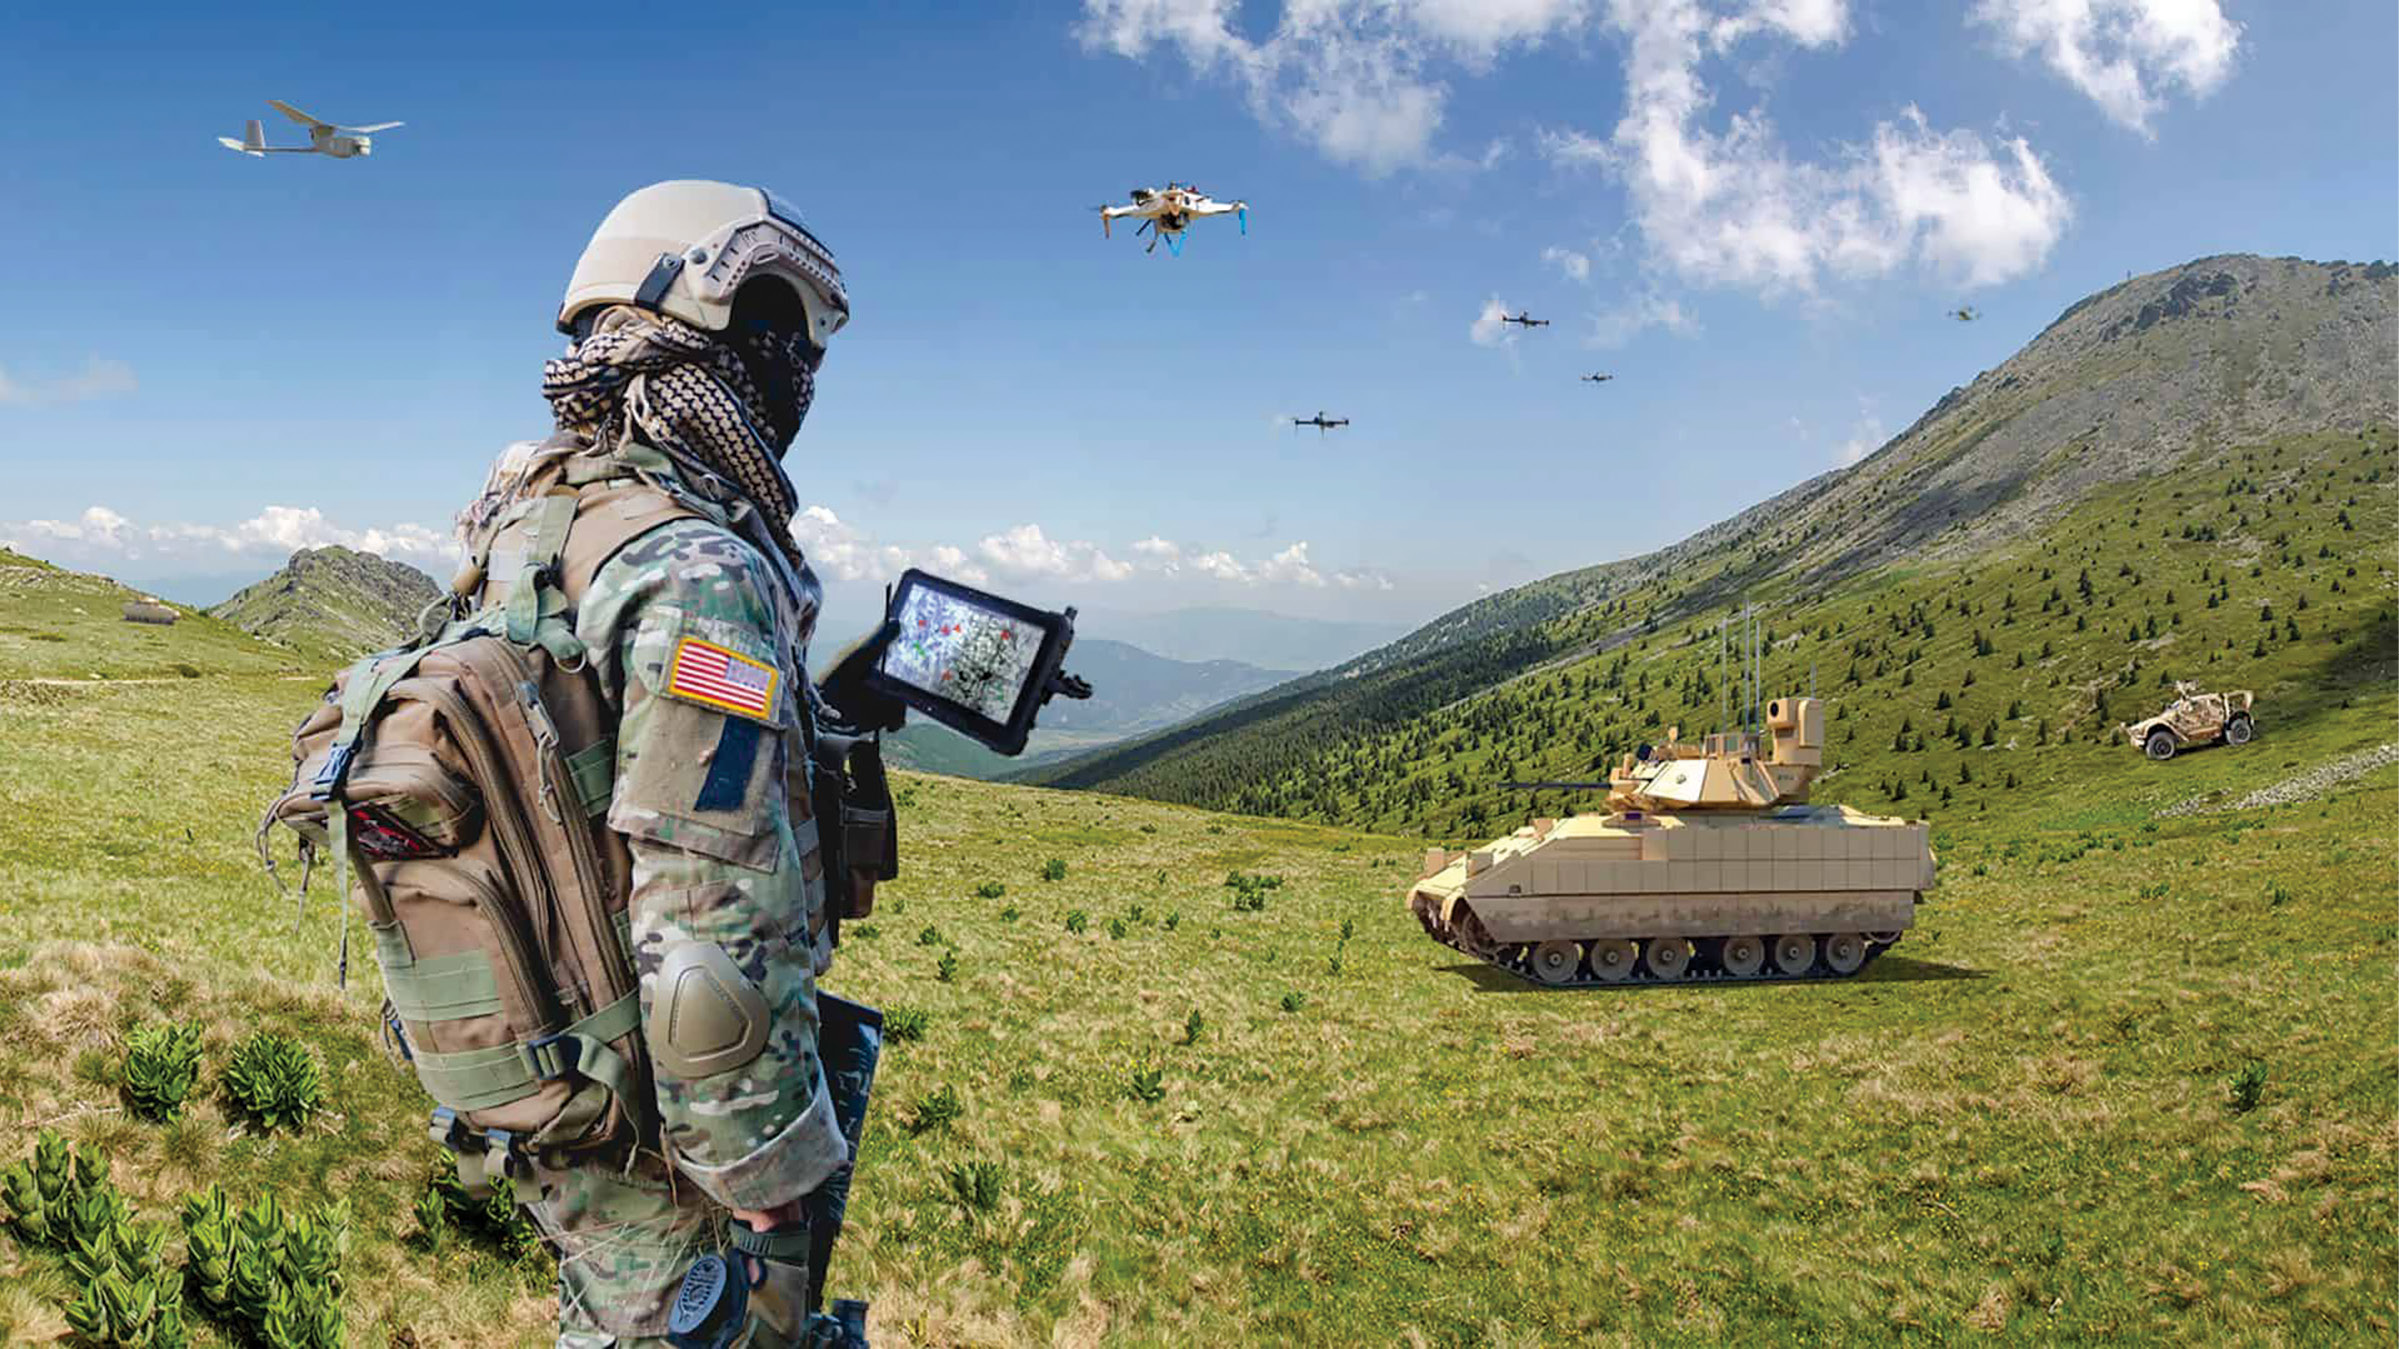 The Smart Targeting Environment for Lower Level Assets program (concept shown here) will enable soldiers to operationalize robotics to rapidly employ, build, and share target data in multi-domain operations.